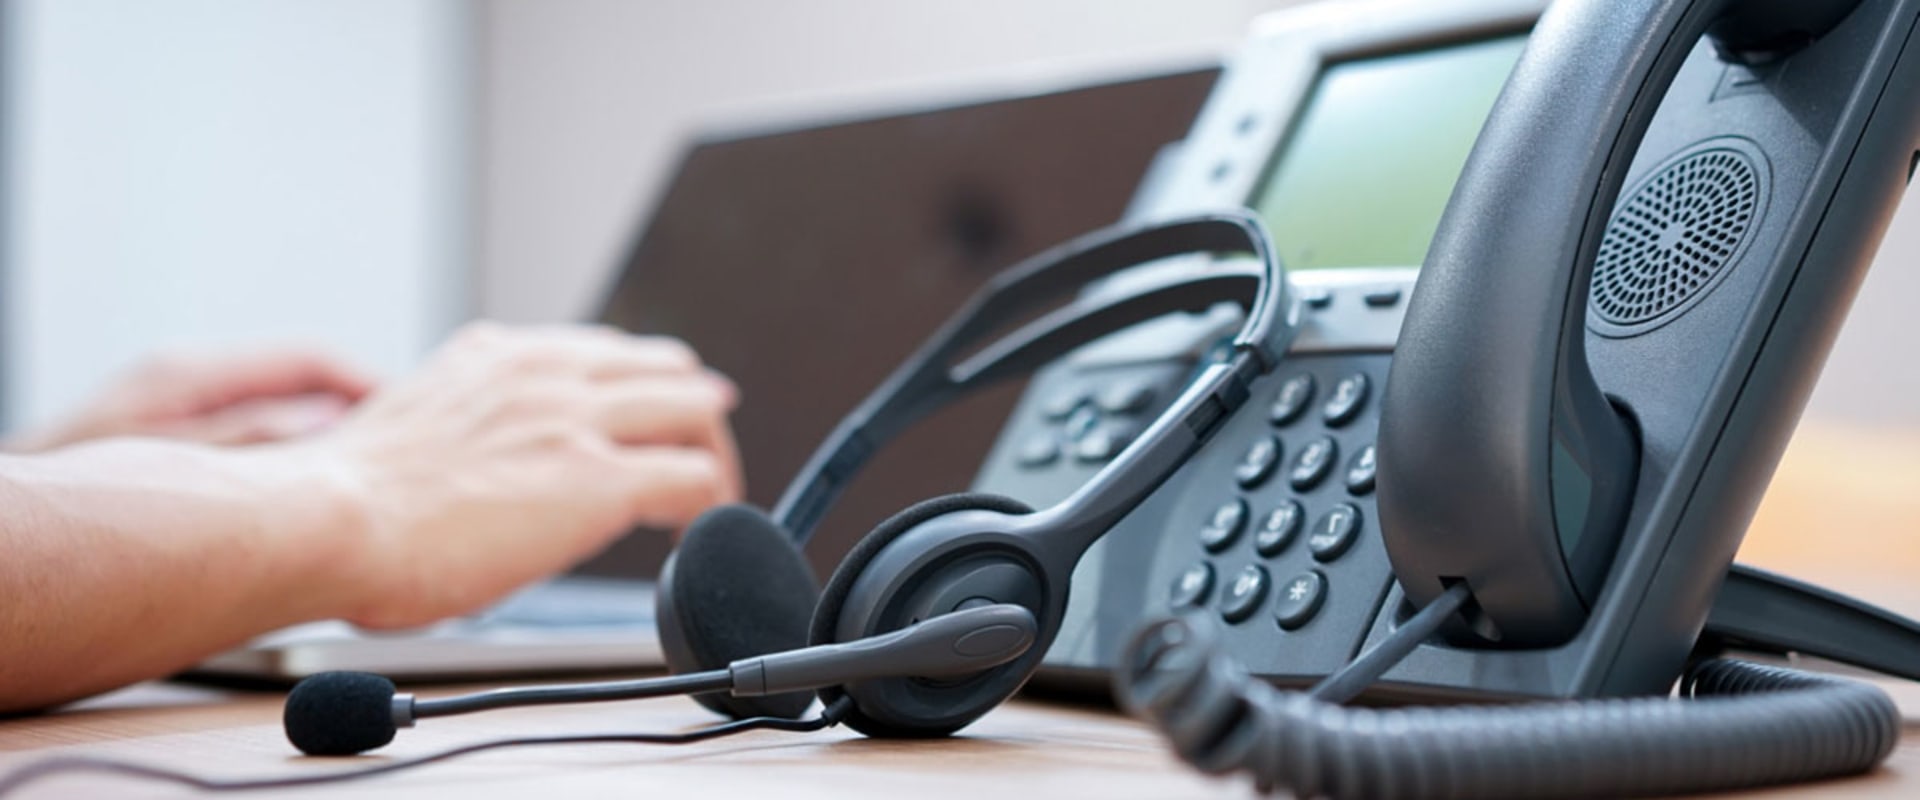 The Benefits of VoIP for Small Businesses